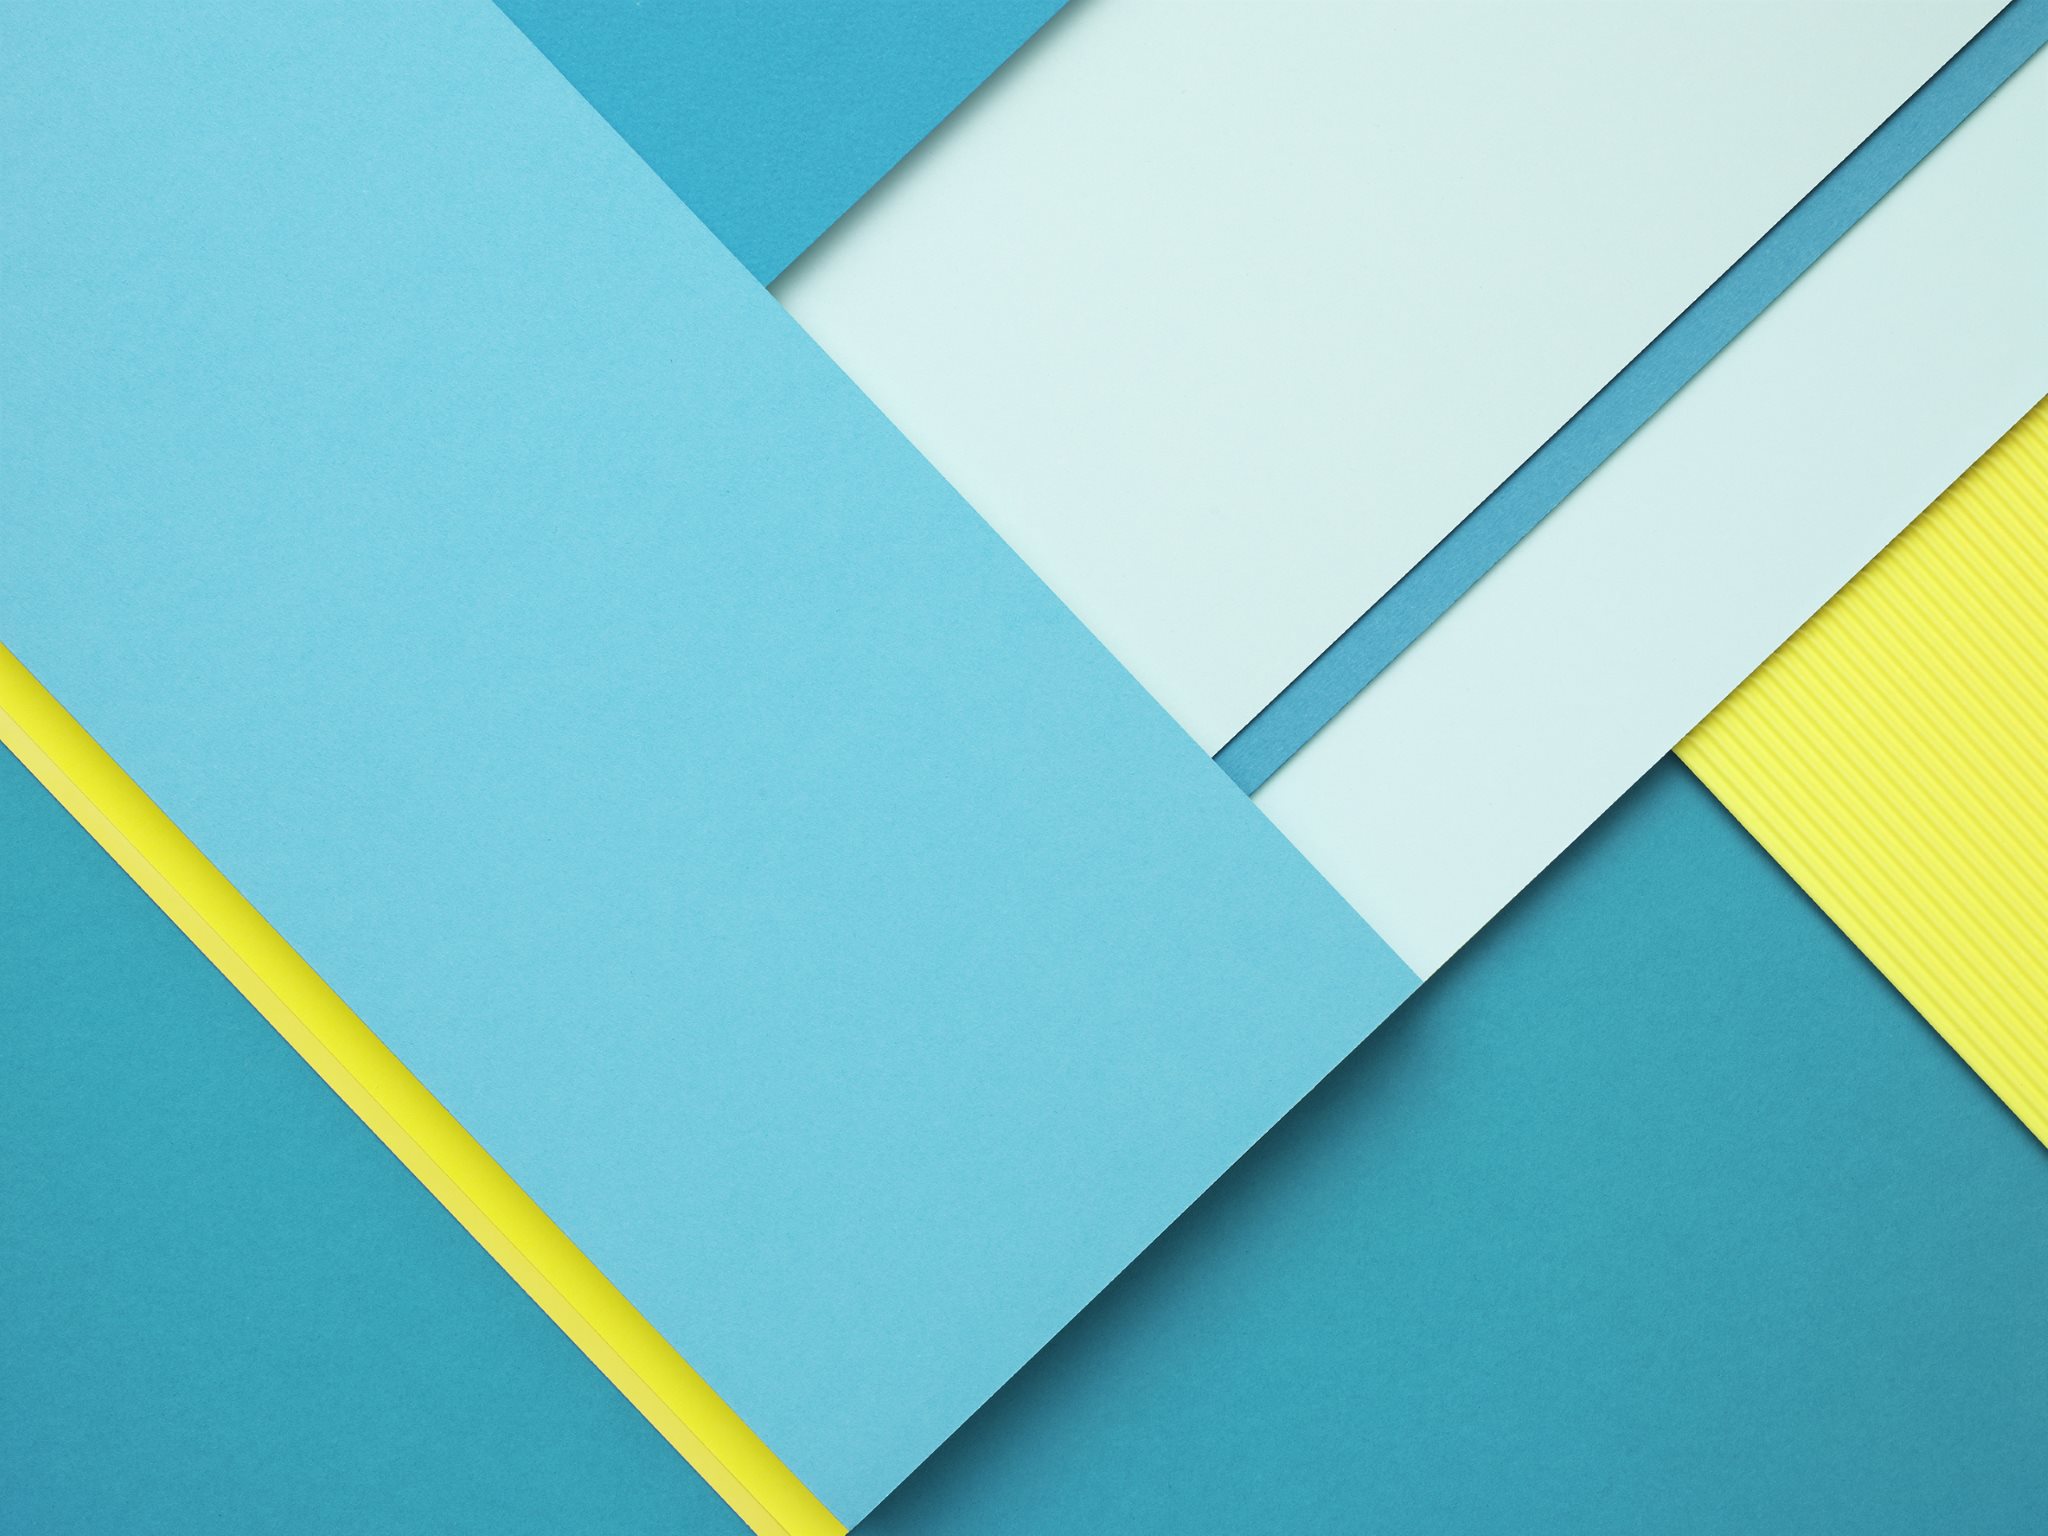 Abstract Material Flat Design Wallpapers